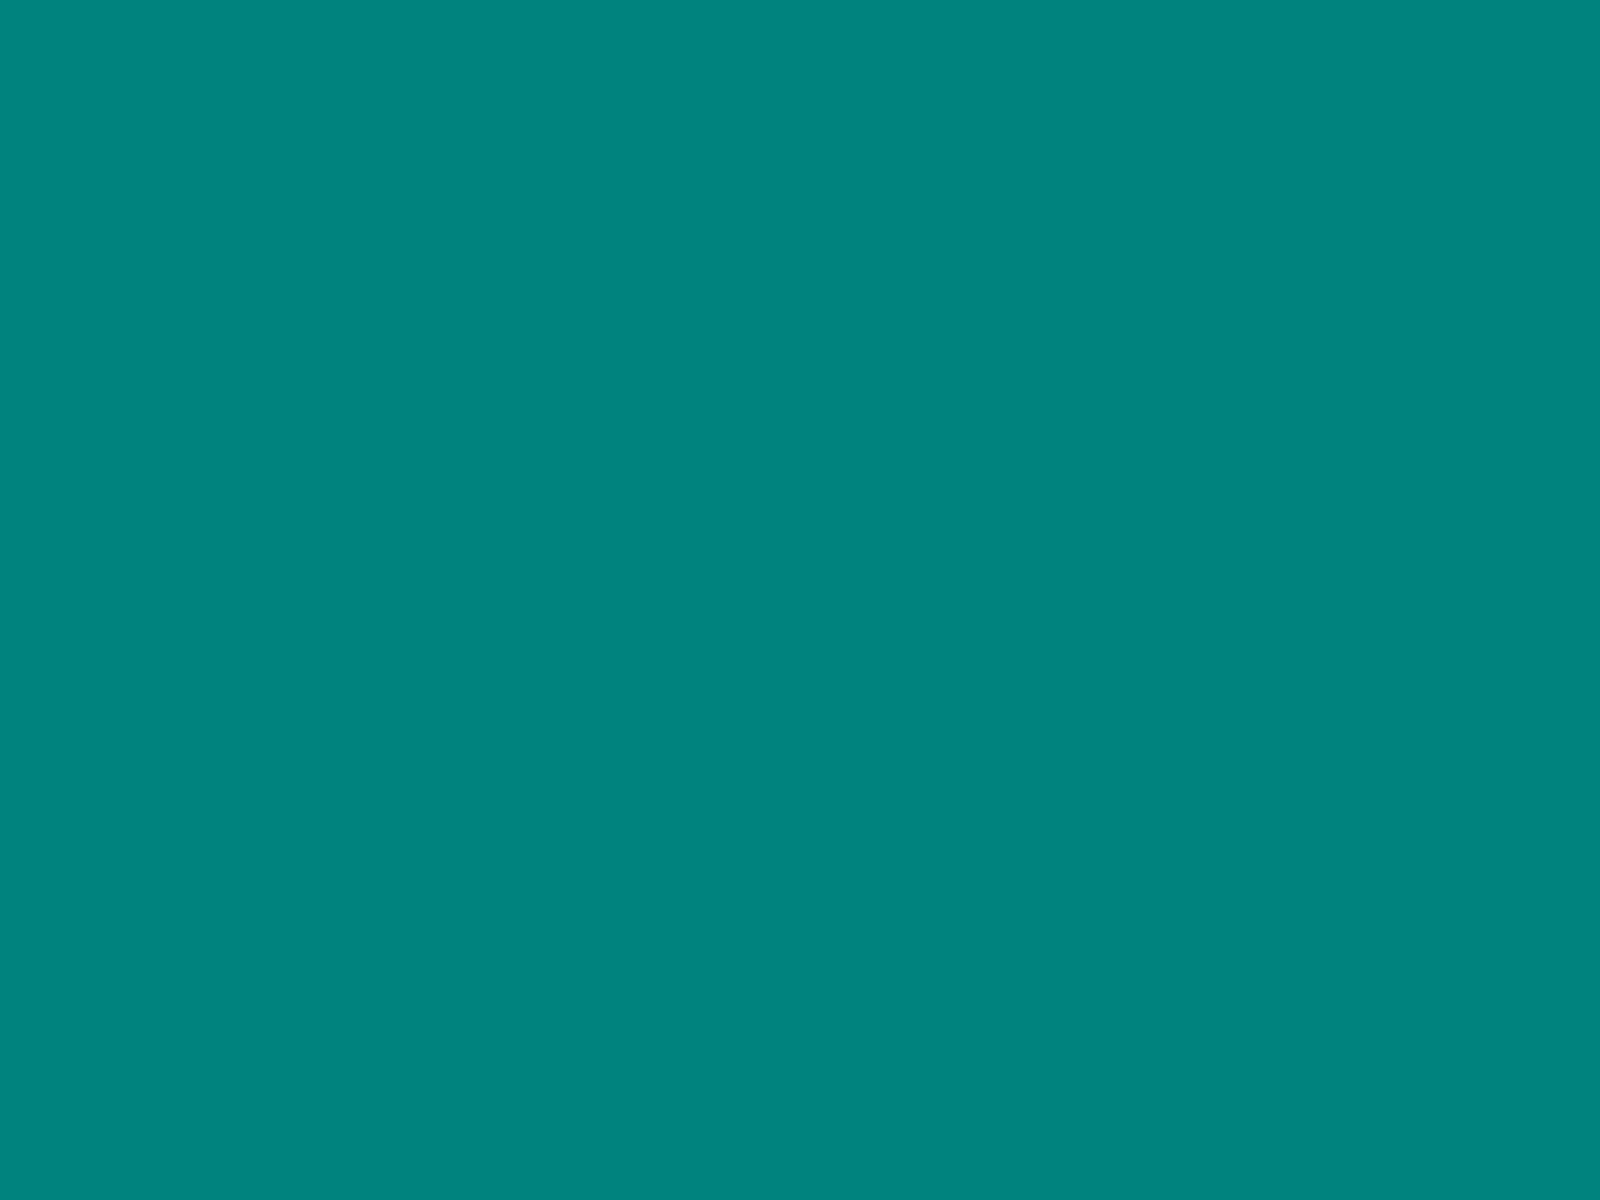 1600x1200 Teal Green Solid Color Background